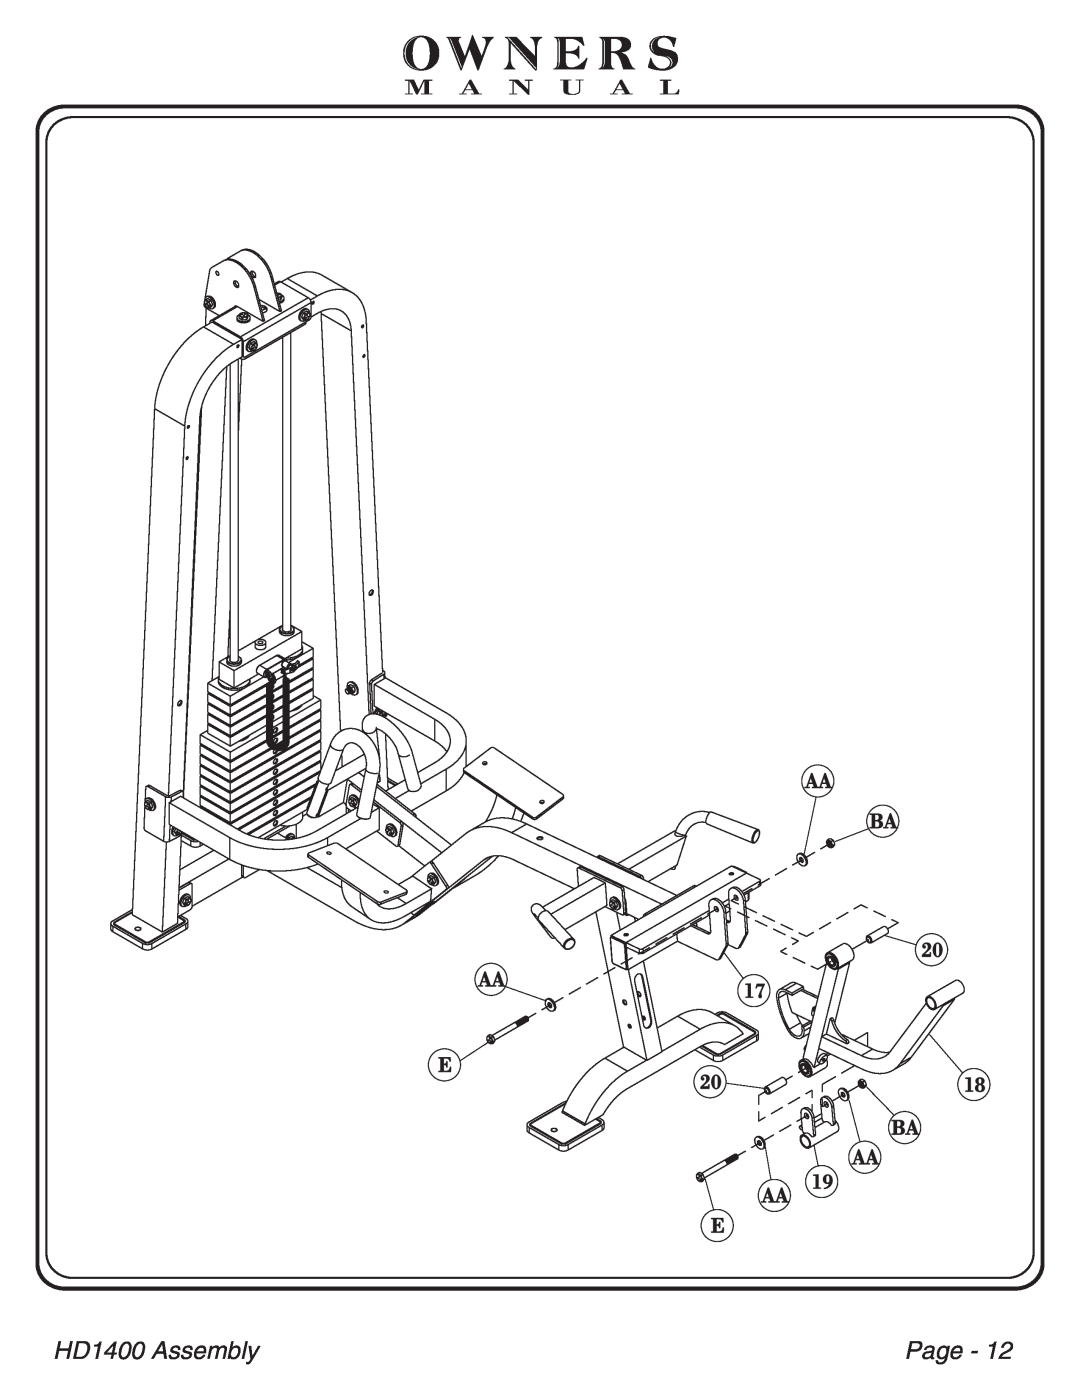 Hoist Fitness HDI400 owner manual Owners, HD1400 Assembly, Page, M A N U A L 